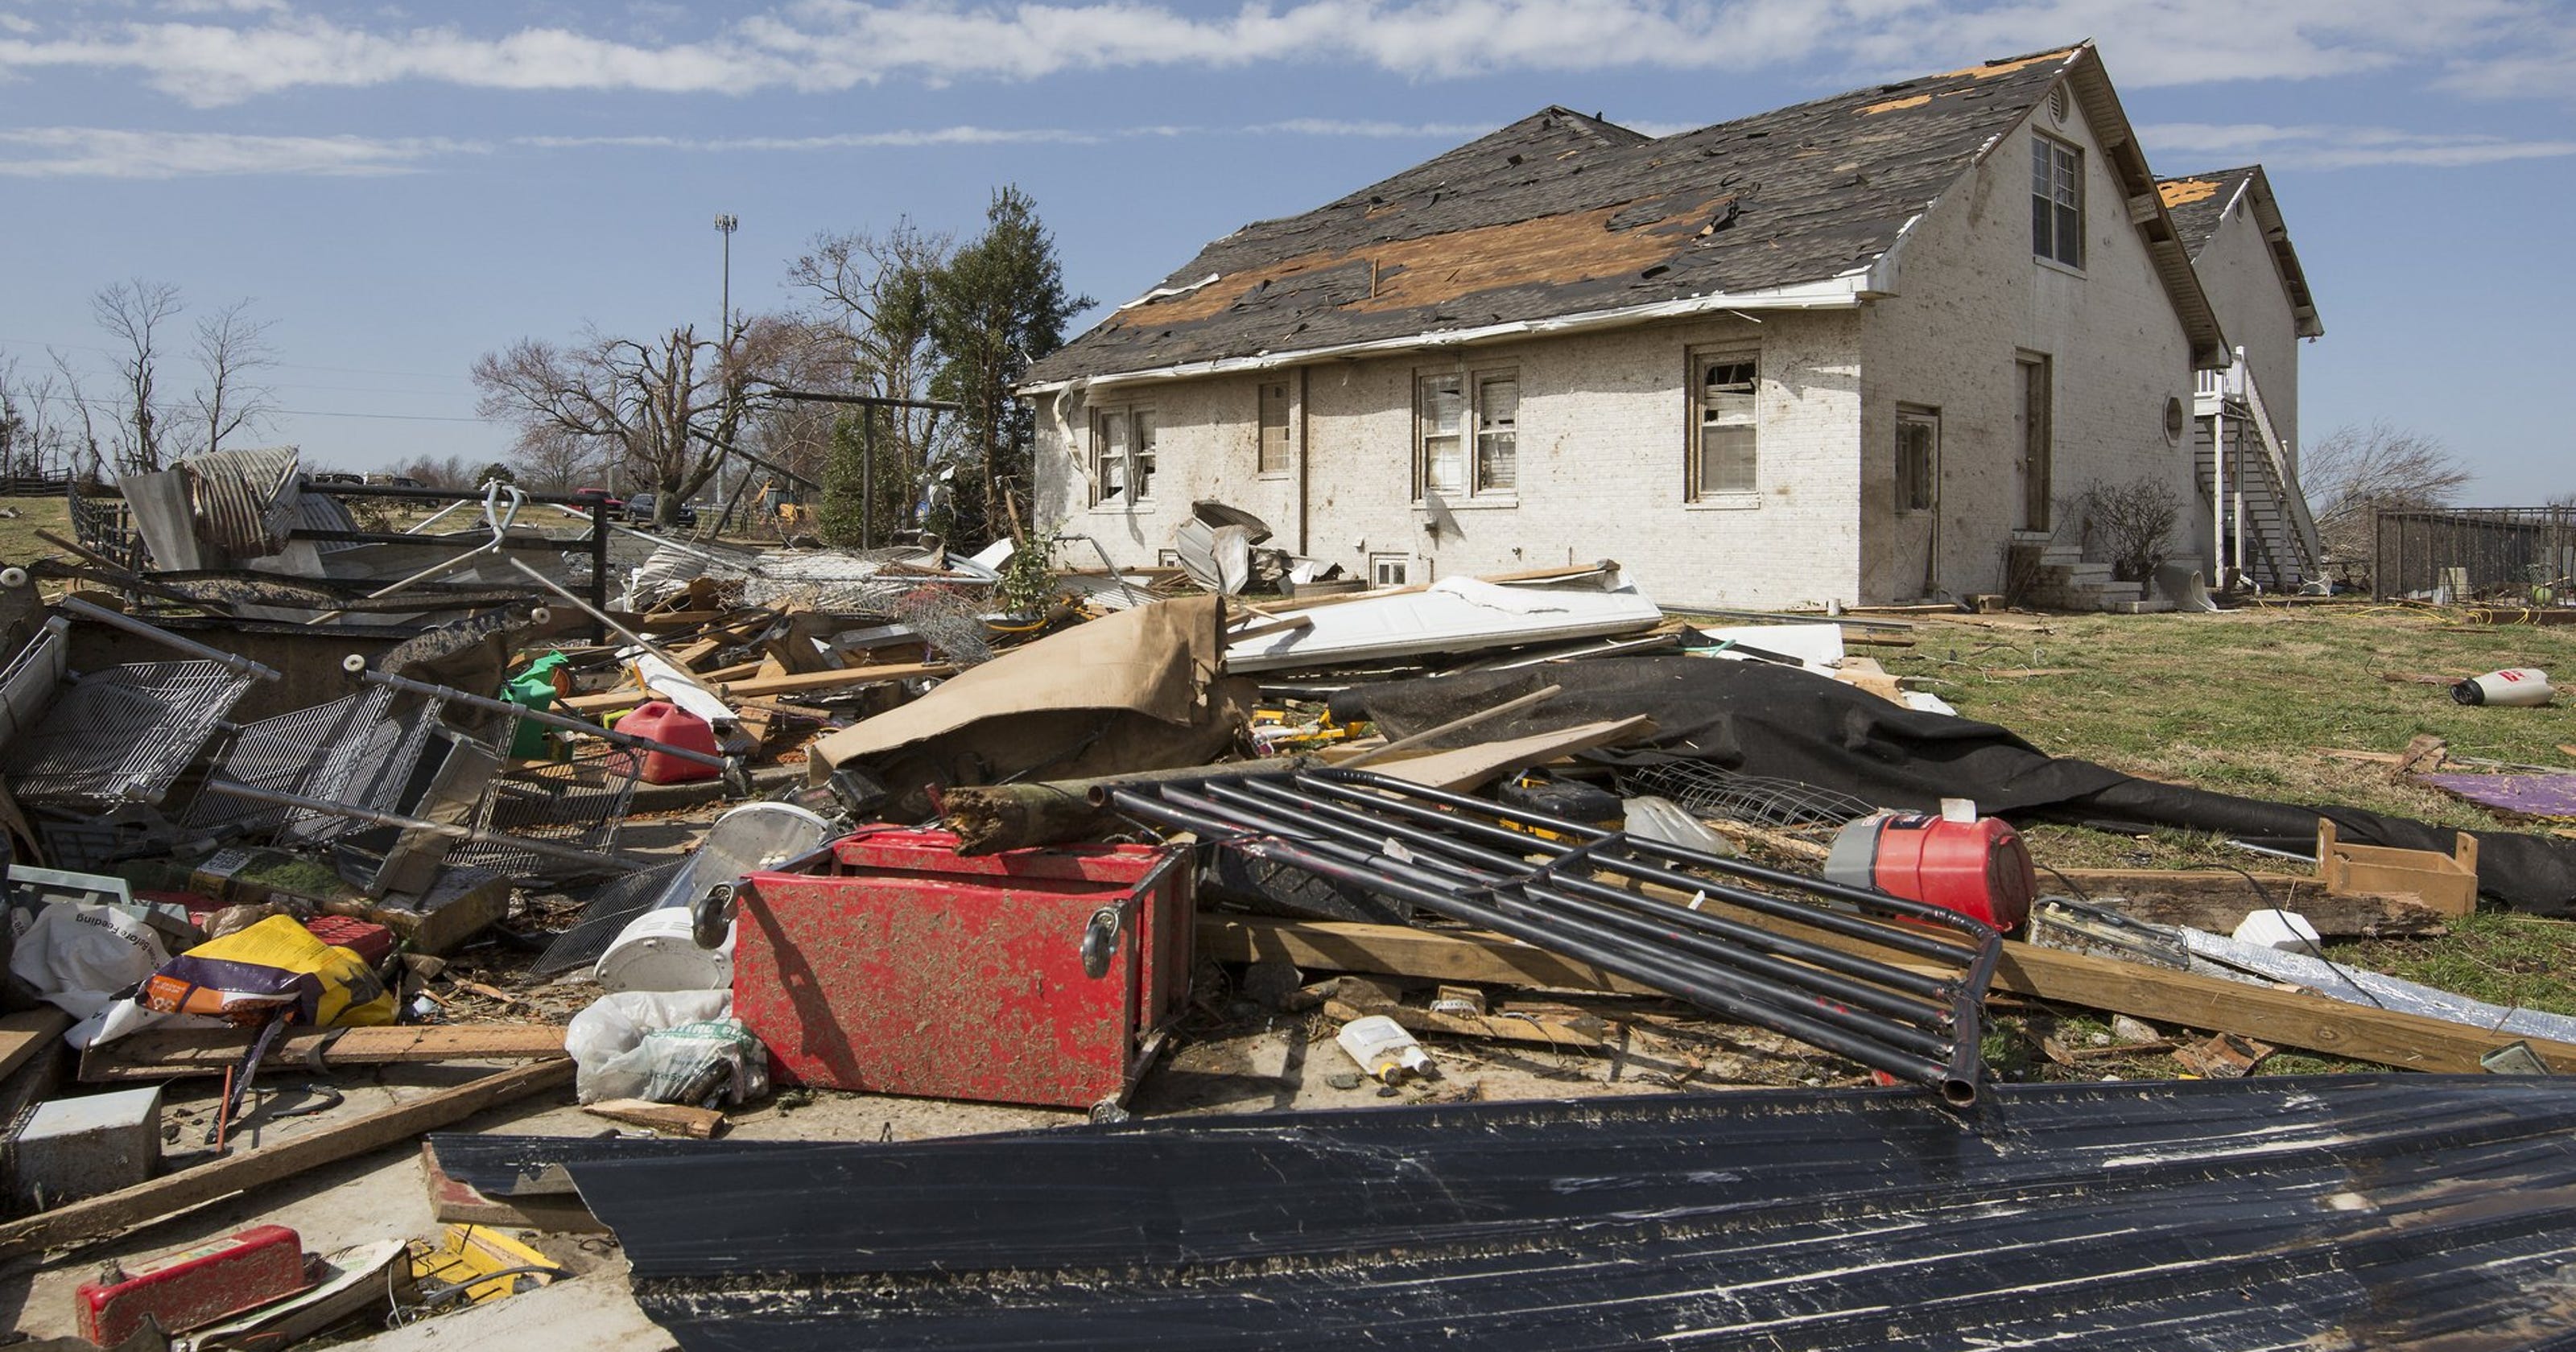 Kentucky tornado See the damage after severe weather in Paducah